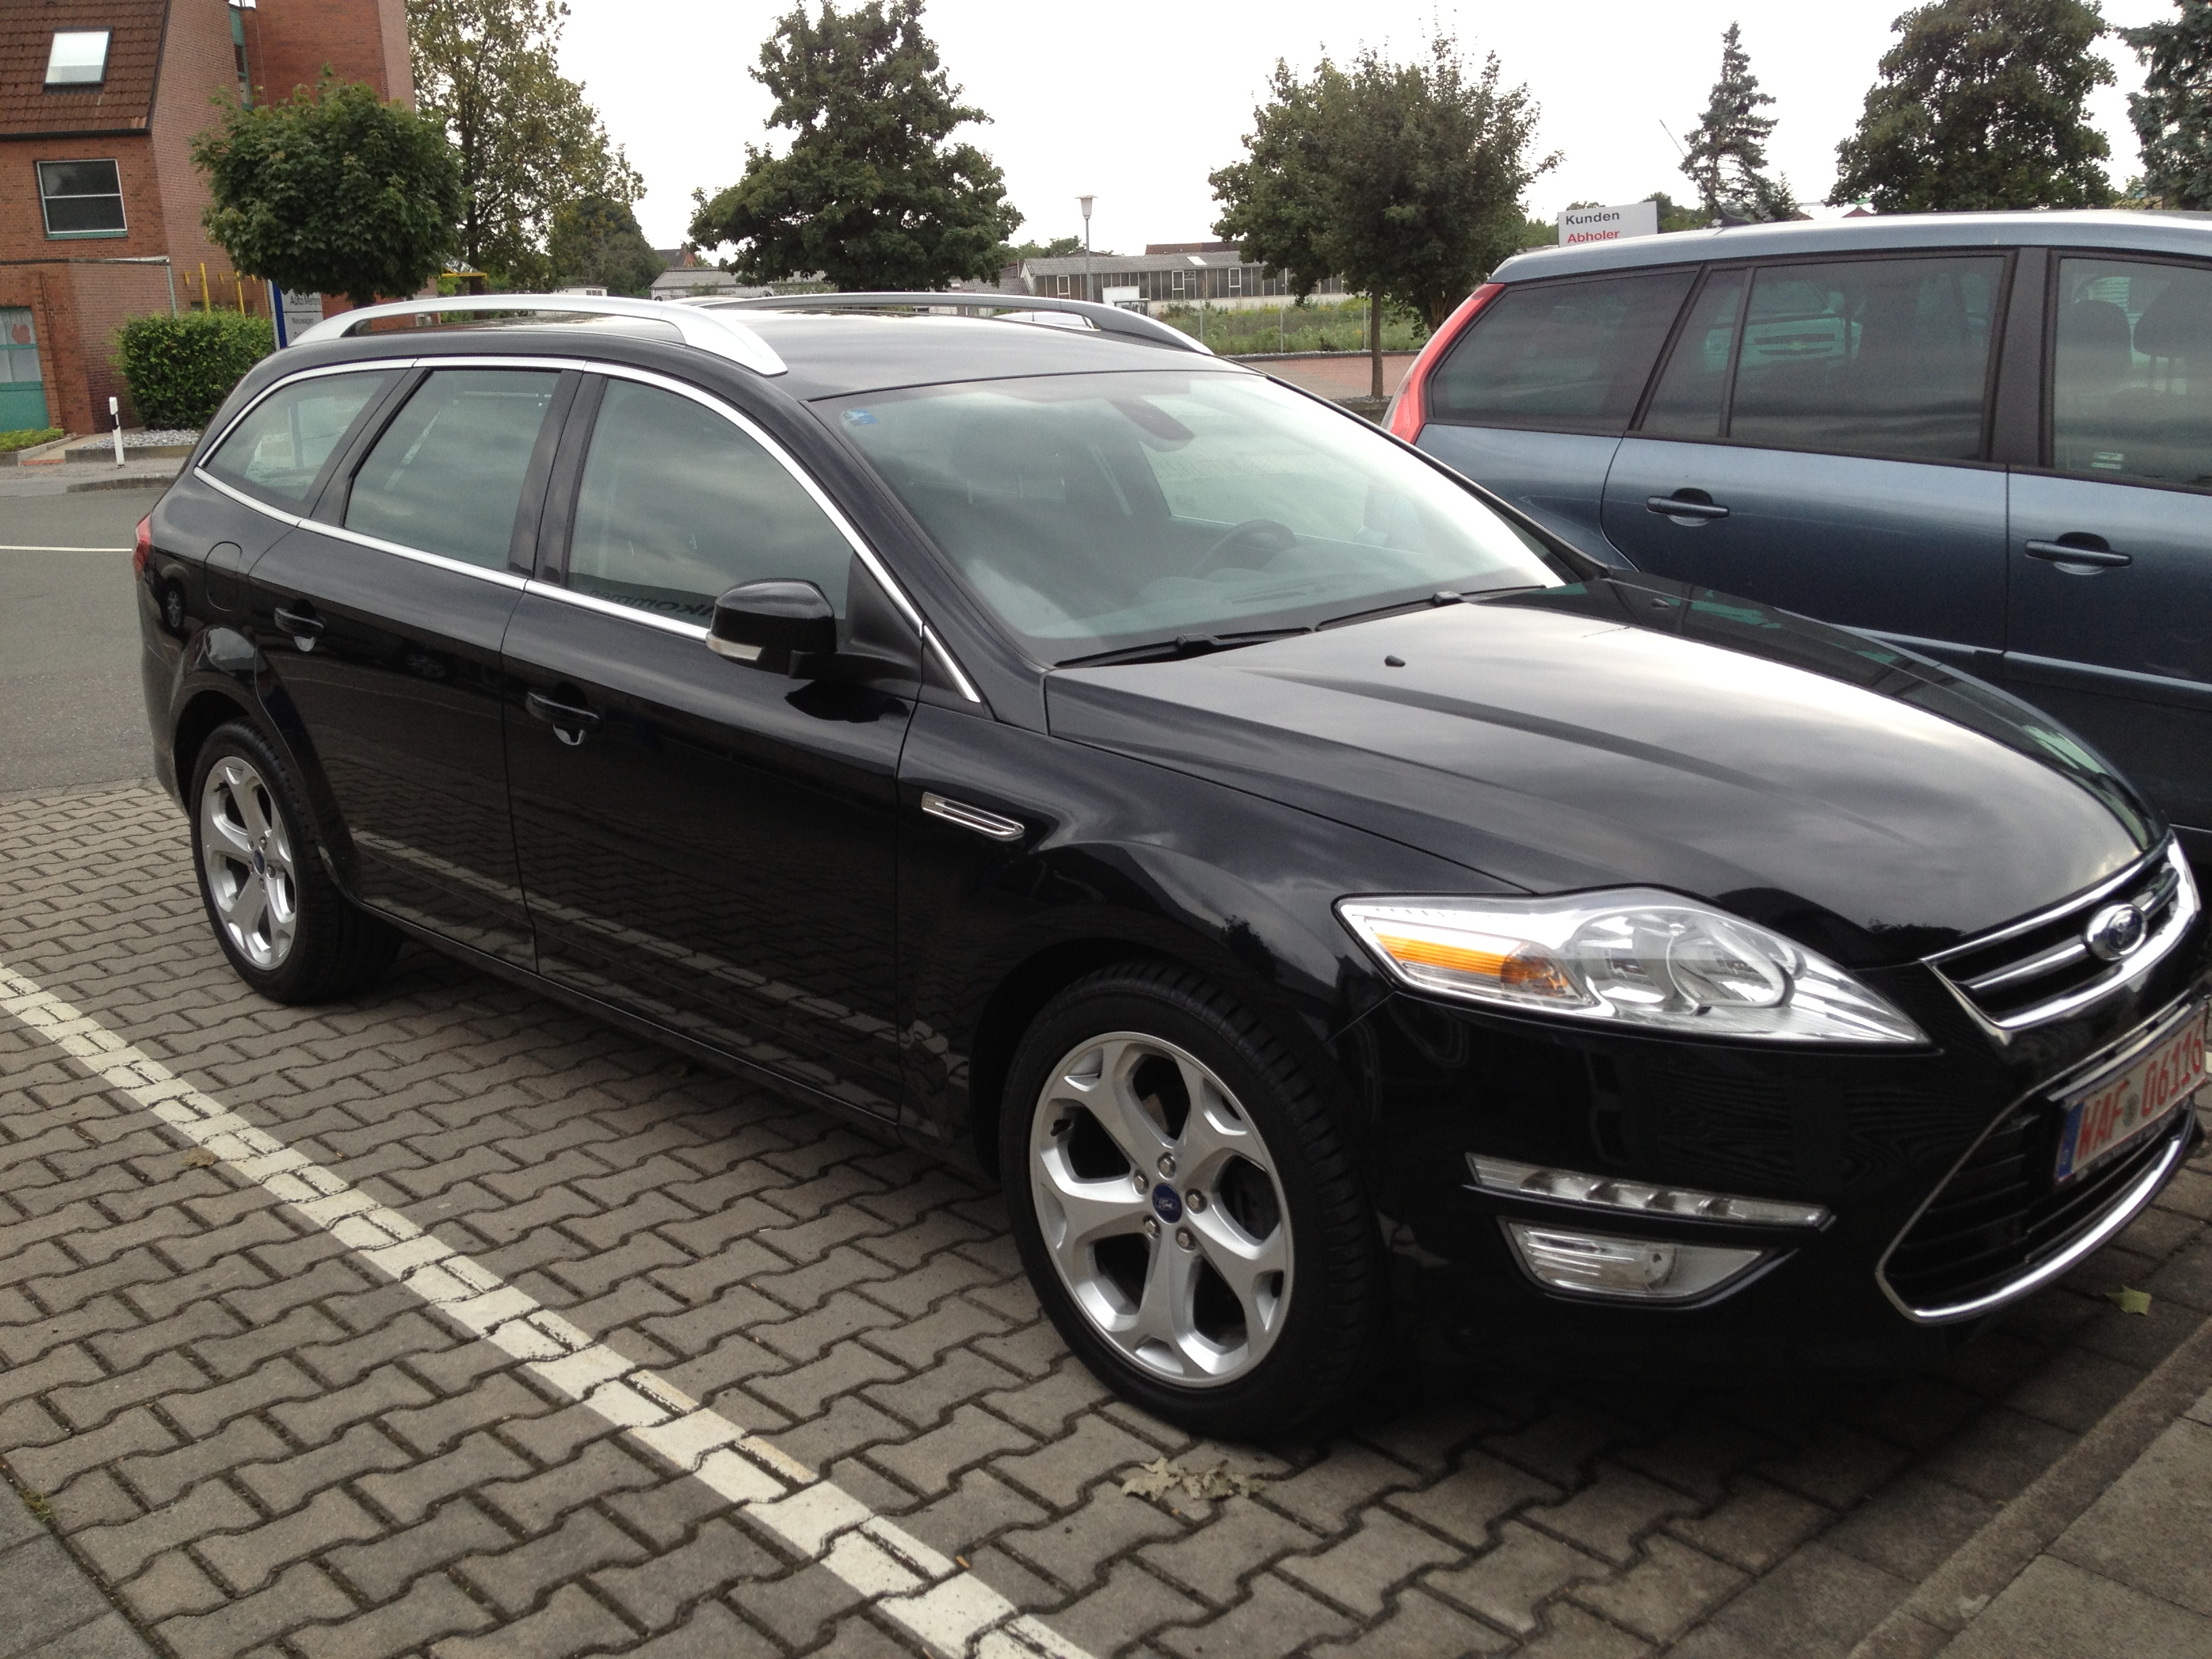 Ford Mondeo BA7 2.0 TDI - celopolep - colorchange (www ...